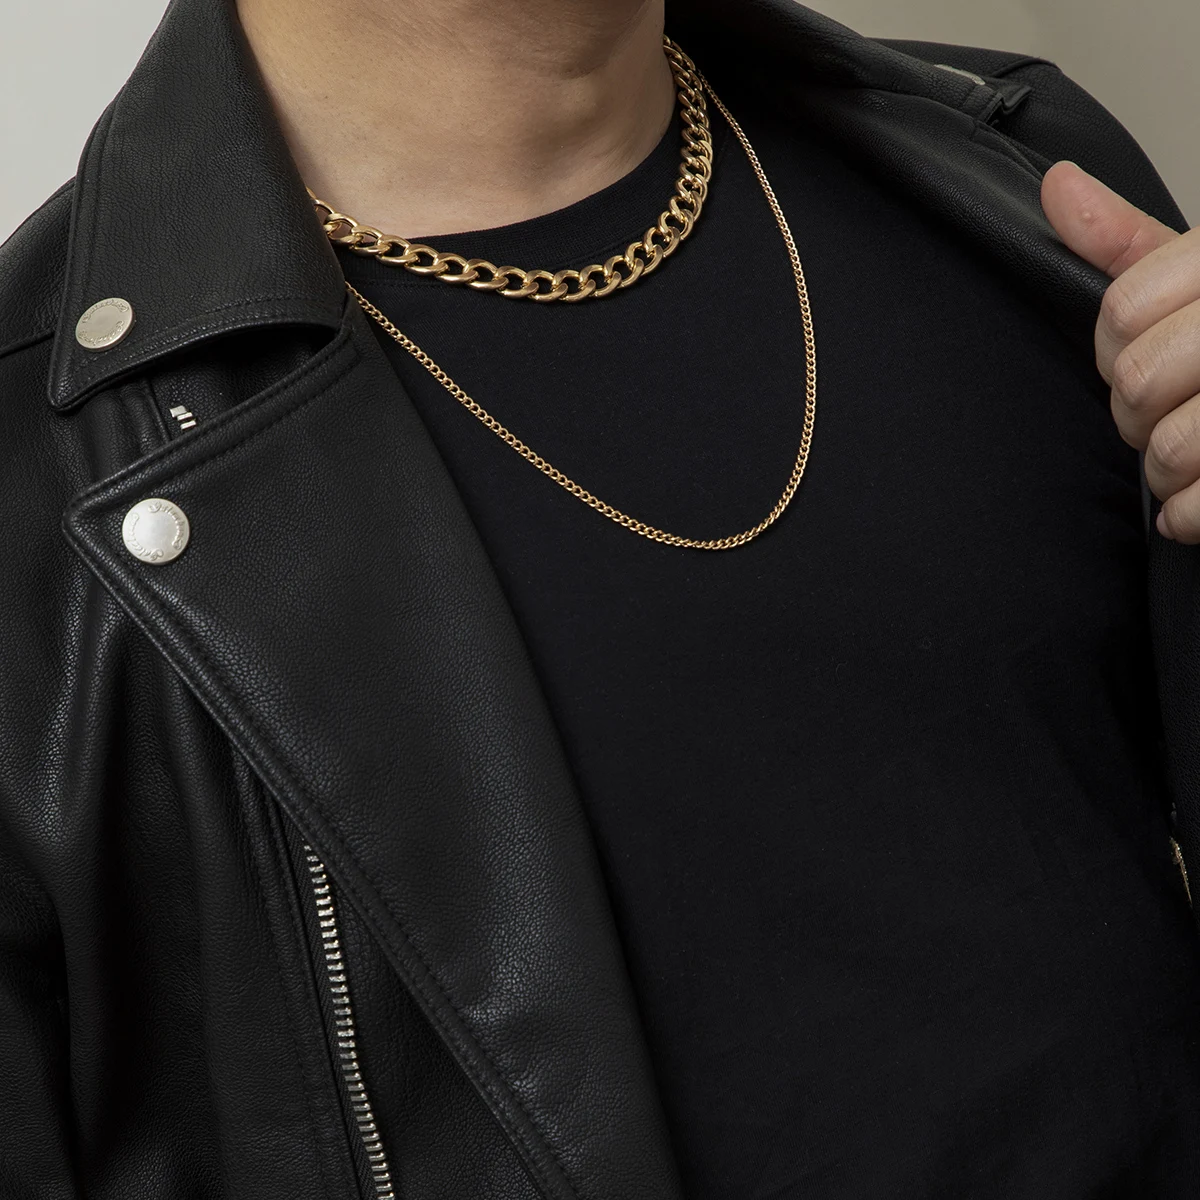 

SHIXIN Simple Hip hop Double Chain 18Inch Men Necklace Jewelry Thick Curb Miami Cuban Link Chain Necklace for Men Street Jewelry, Silver,gold